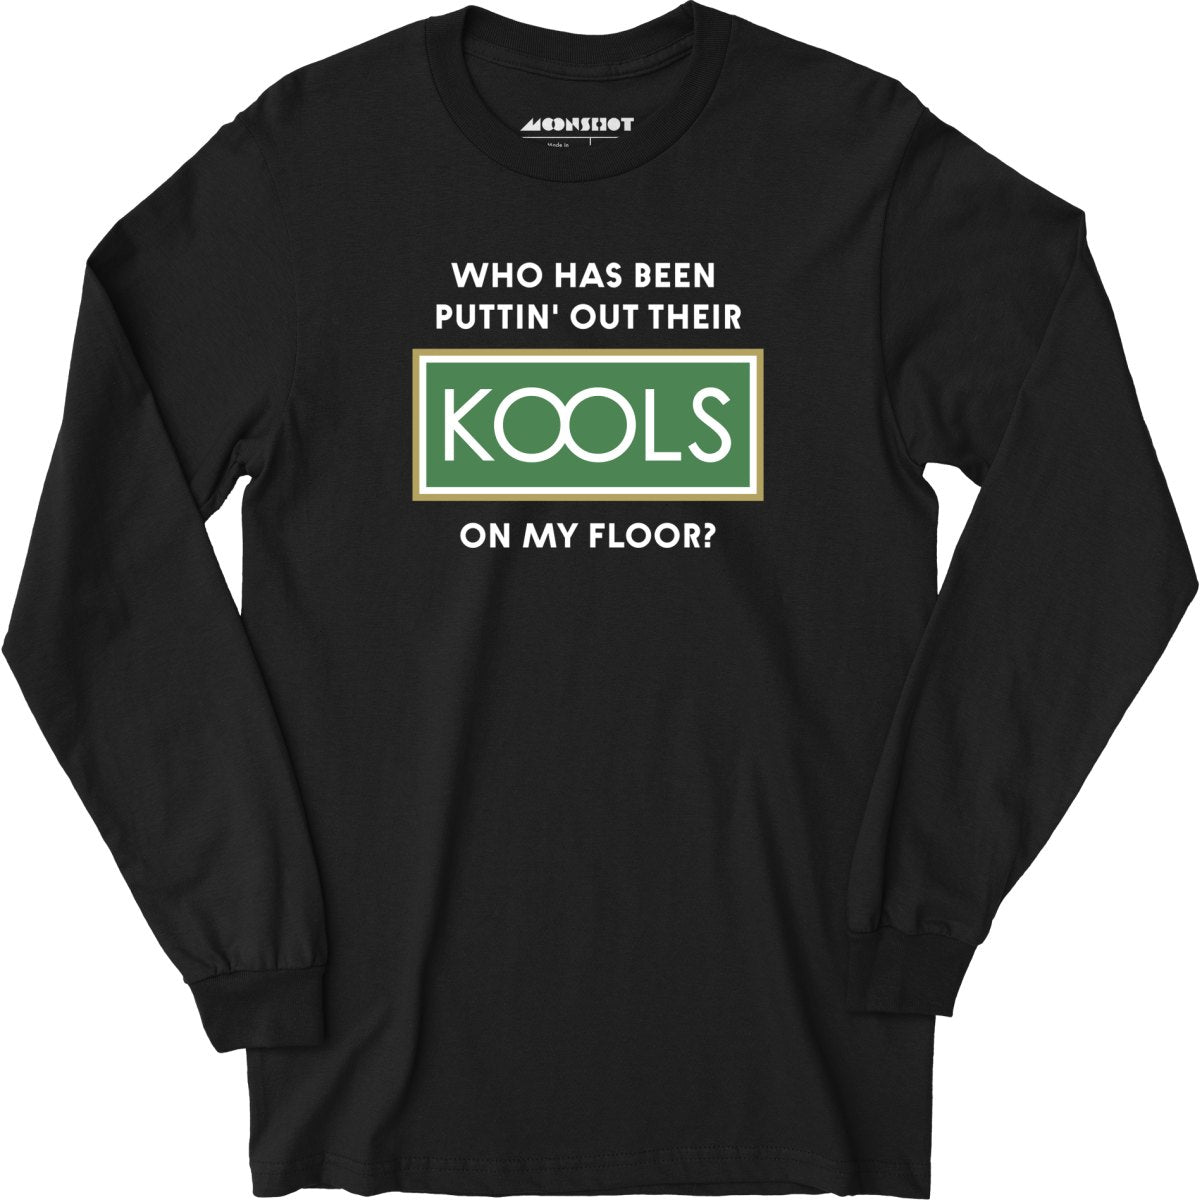 Who Has Been Puttin' Out Their Kools On My Floor? - Long Sleeve T-Shirt